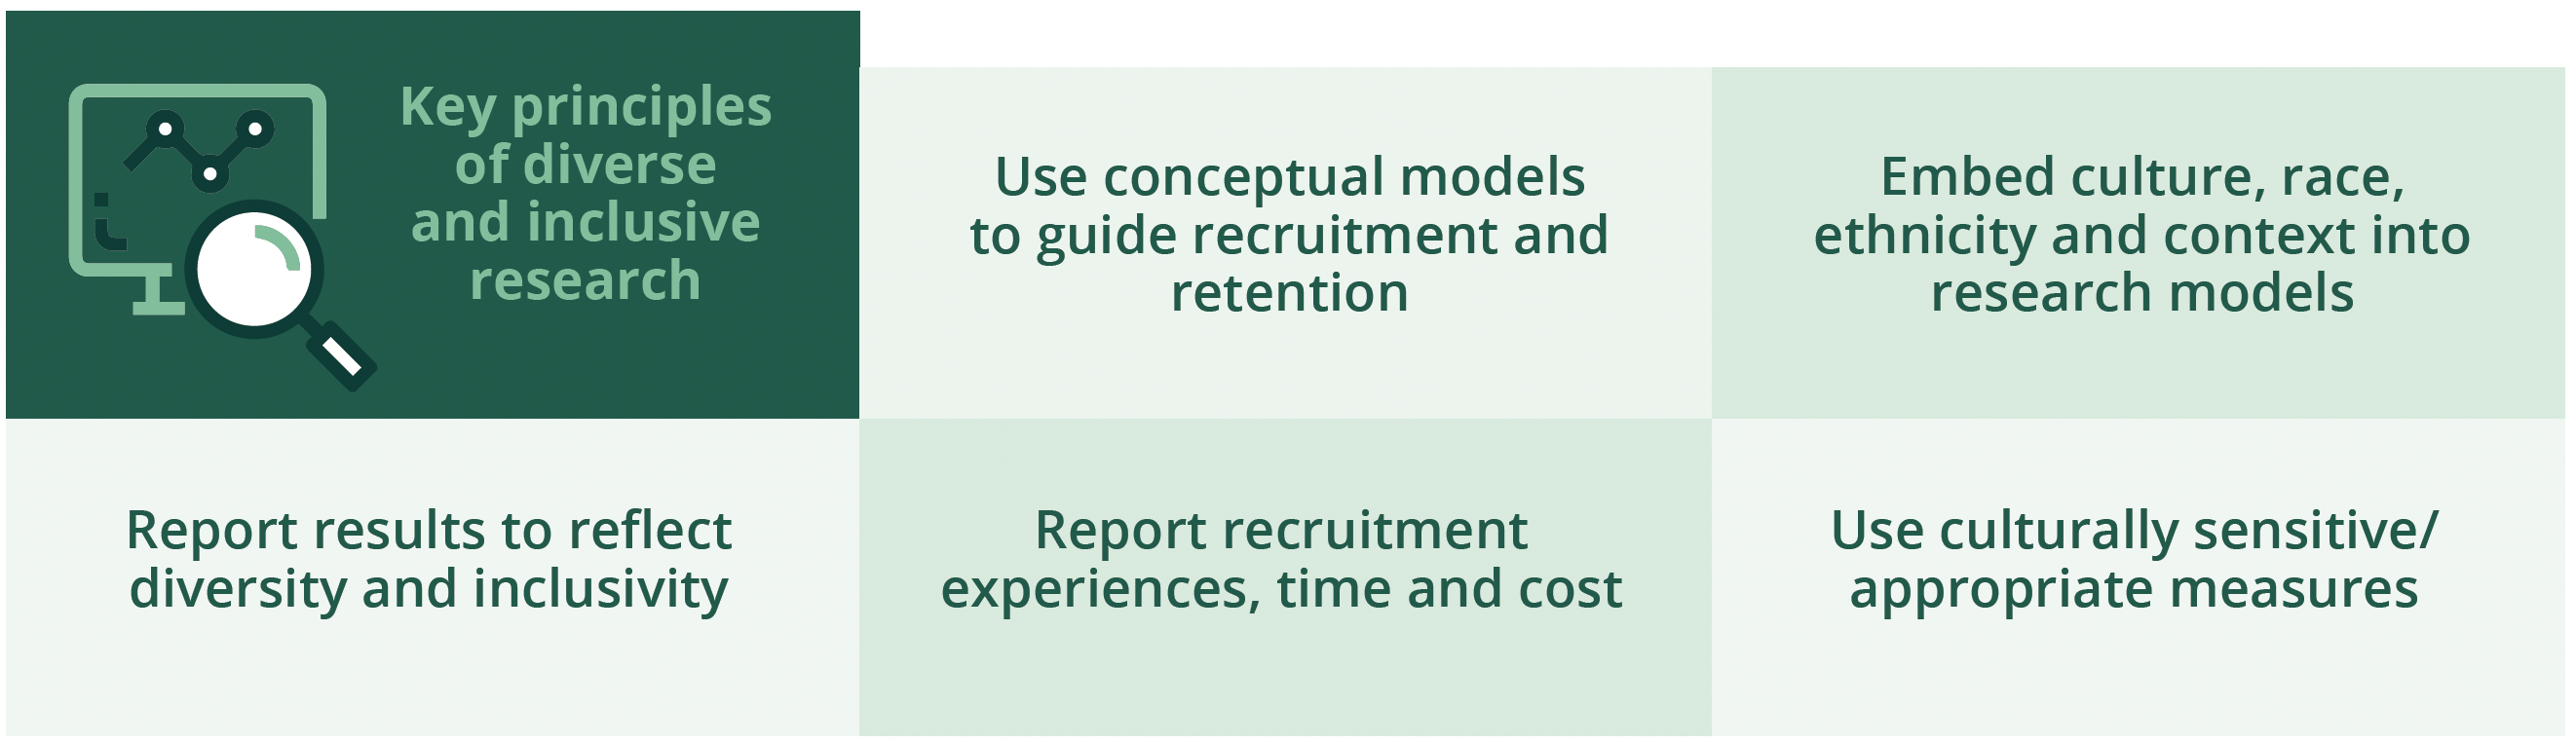 Key principles of diverse and inclusive research includes conceptual models to guide recruitment and retention